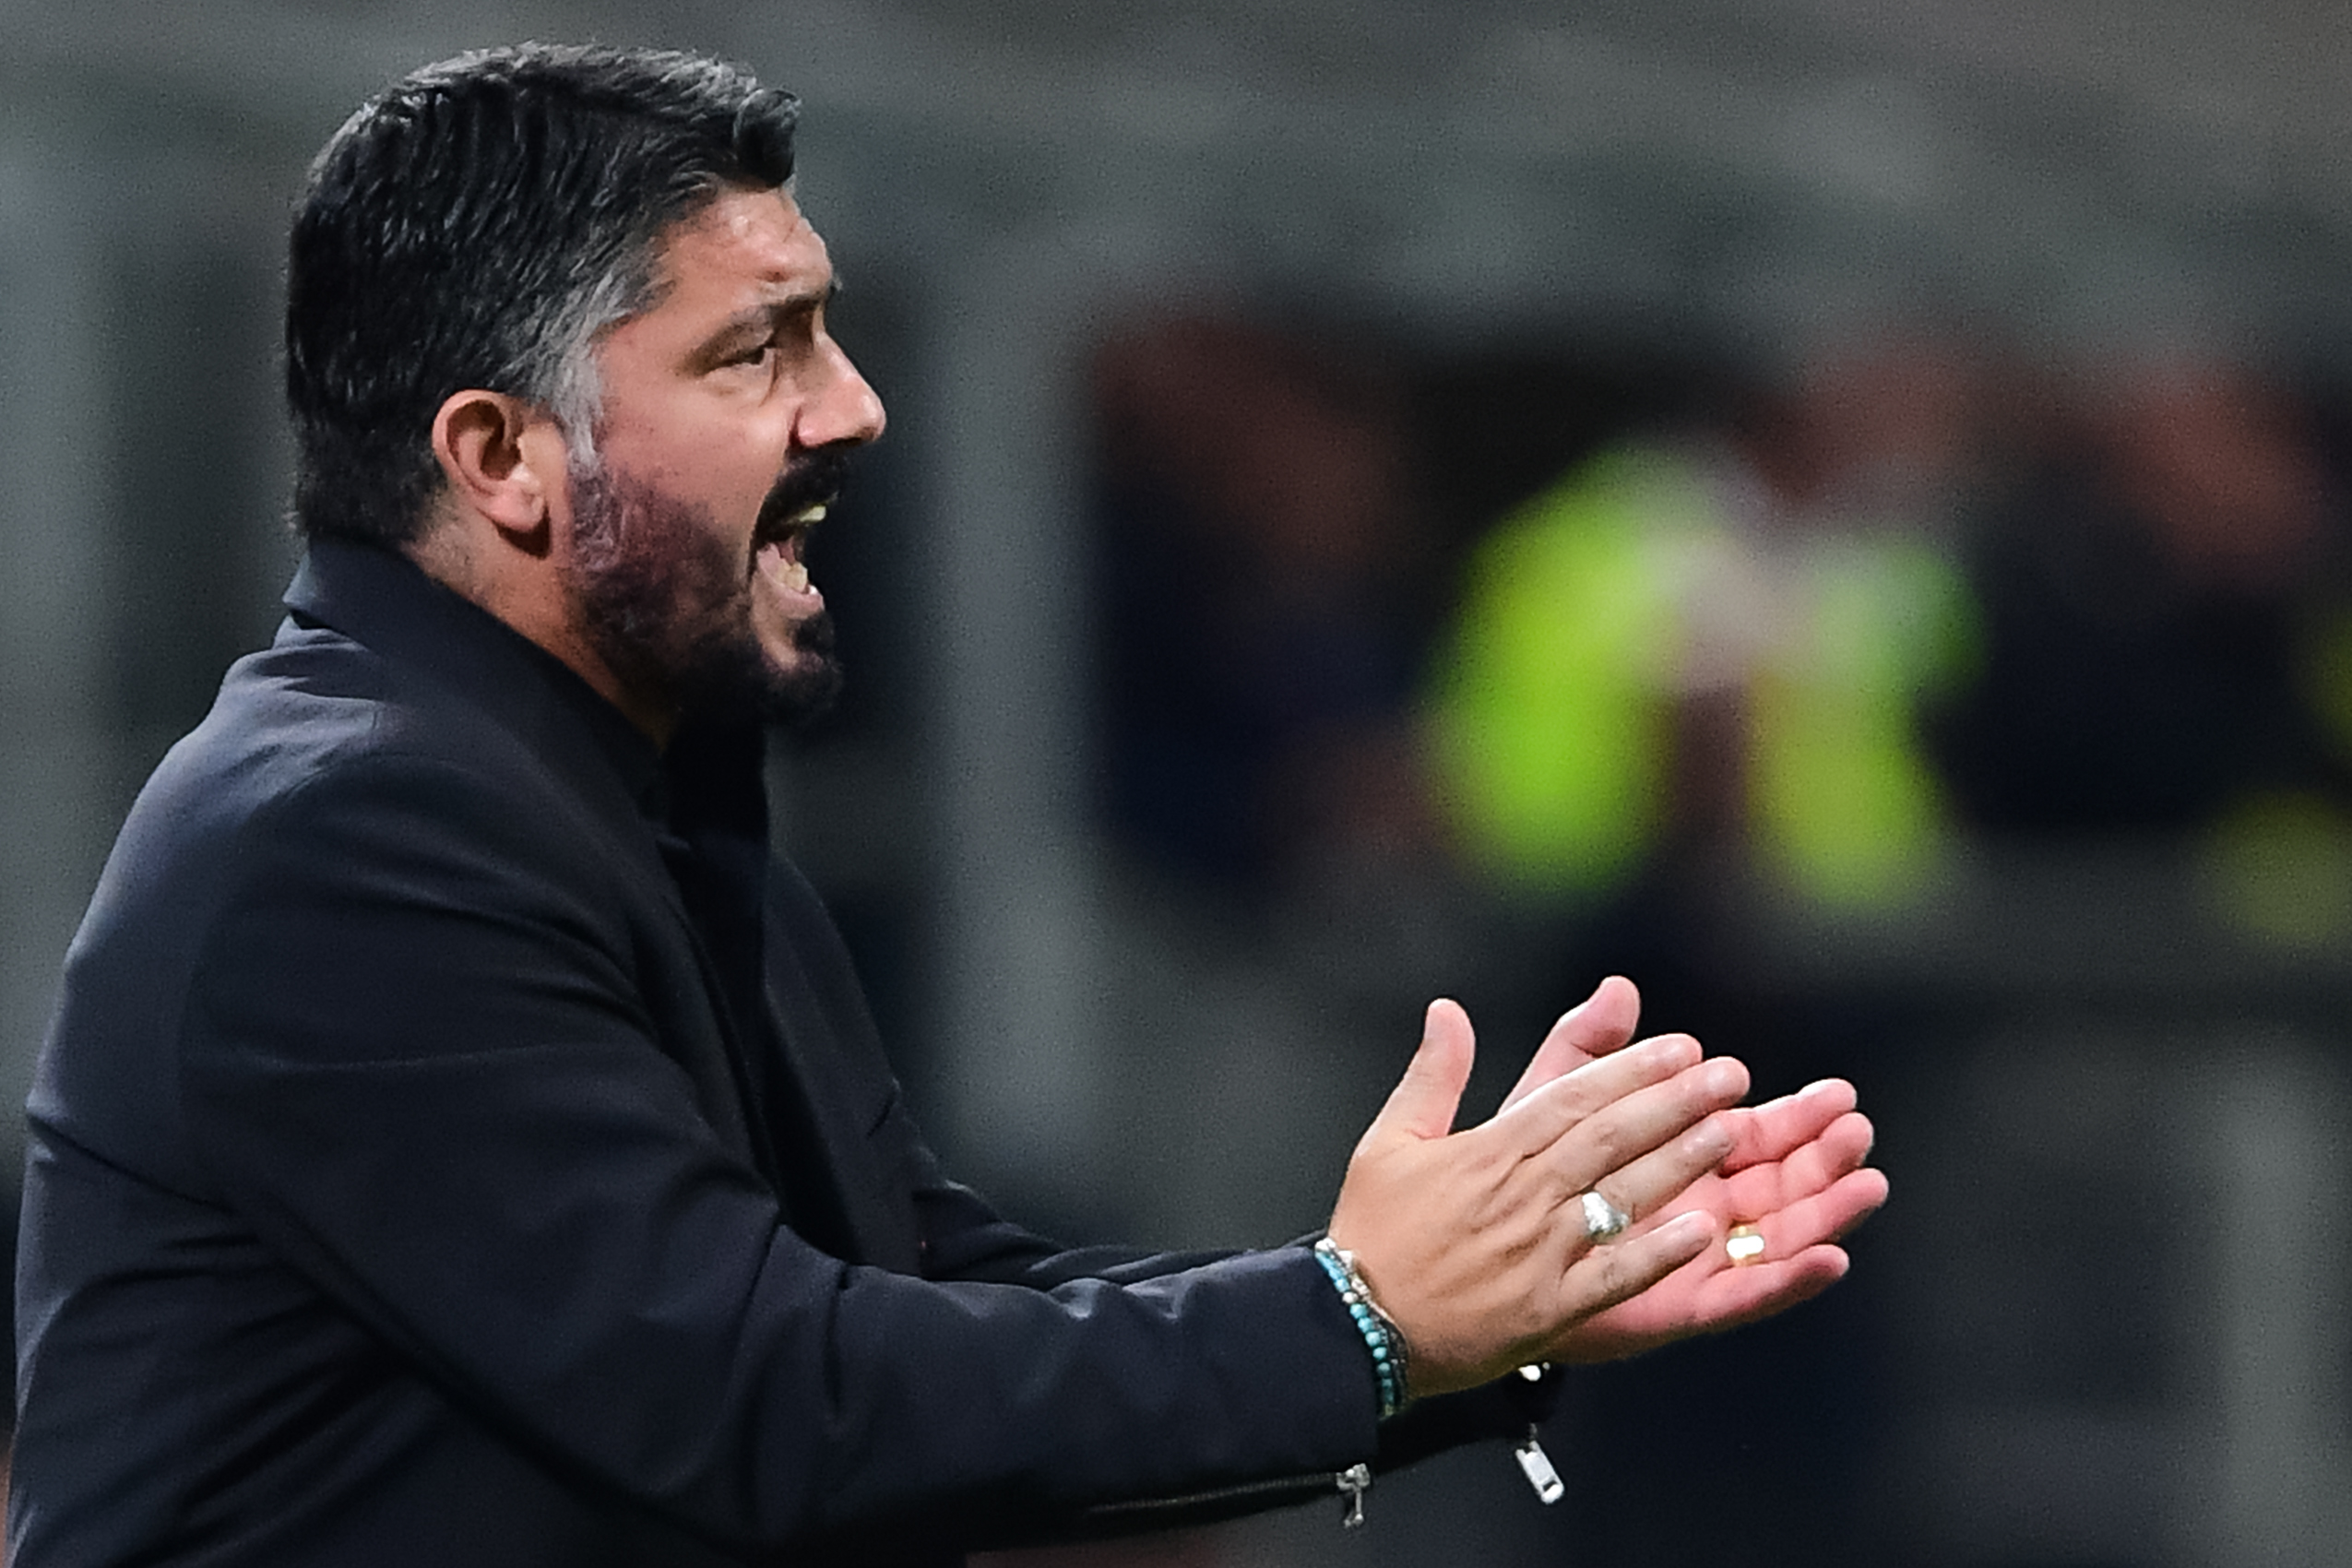 AC Milan's Italian coach Gennaro Gattuso gives instructions during the Europa League Group F football match between AC Milan and Olympiakos at the San Siro stadium on October 4, 2018 in Milan. (Photo by Miguel MEDINA / AFP)        (Photo credit should read MIGUEL MEDINA/AFP/Getty Images)